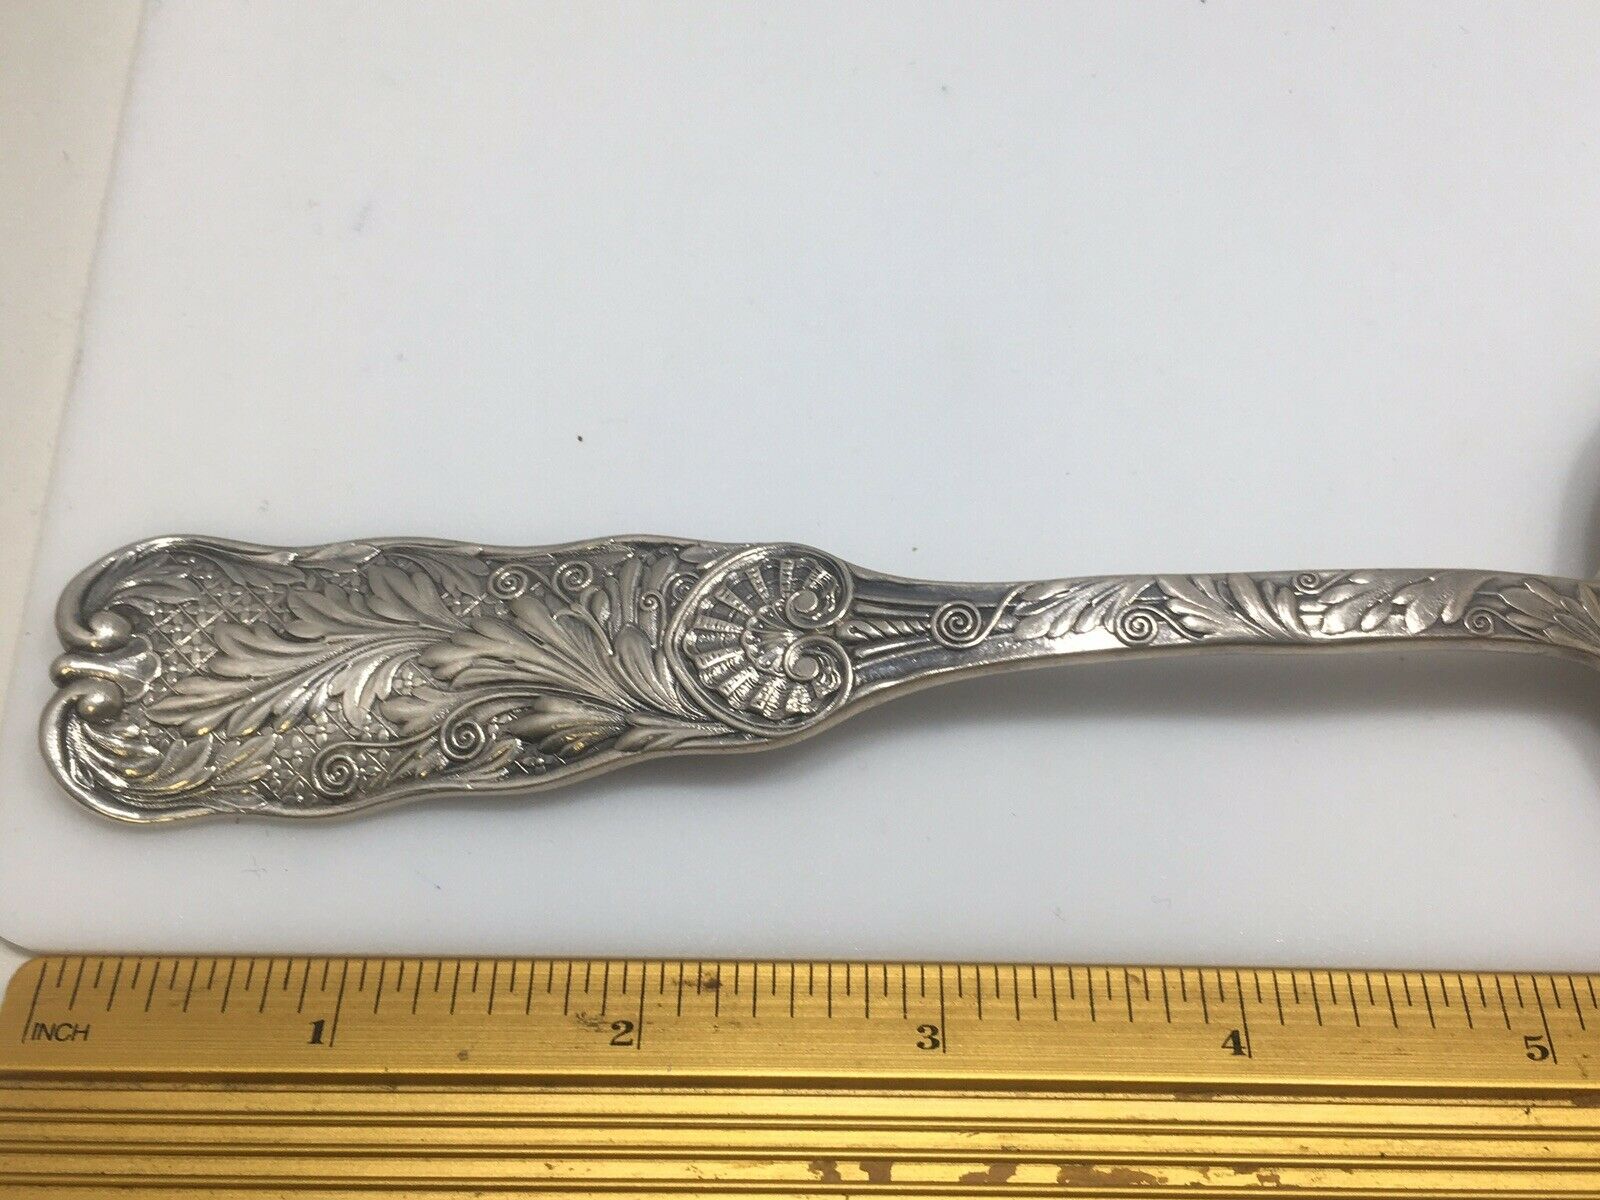 Antique Gorham St Cloud Etched Huge Berry Pea Spoon Sterling Silver